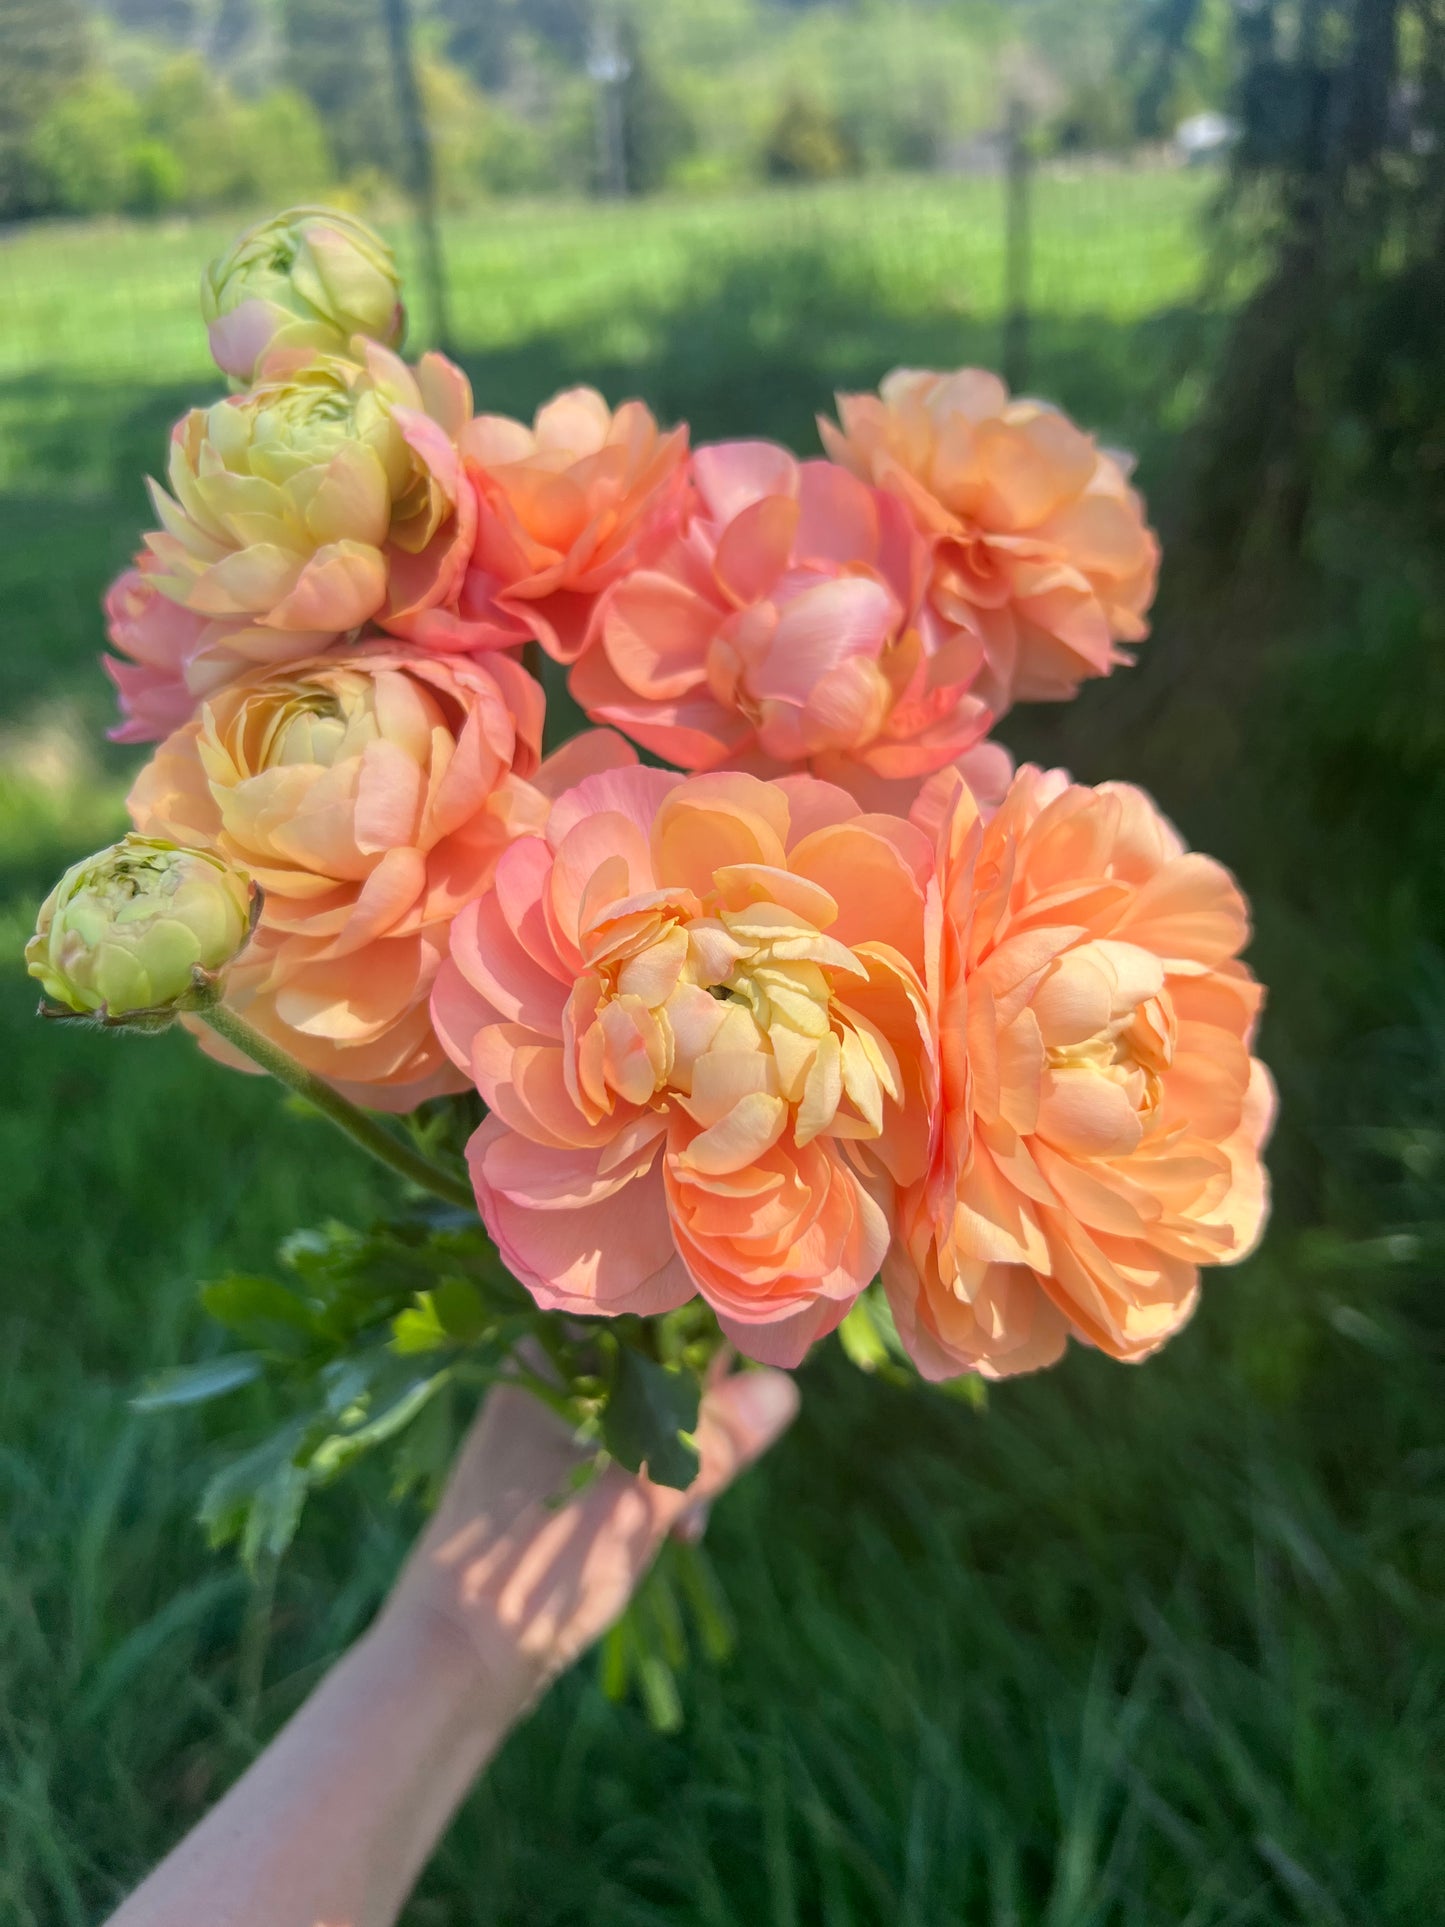 Ranunculus Elegance Pastello - 20 corms (Available Now)